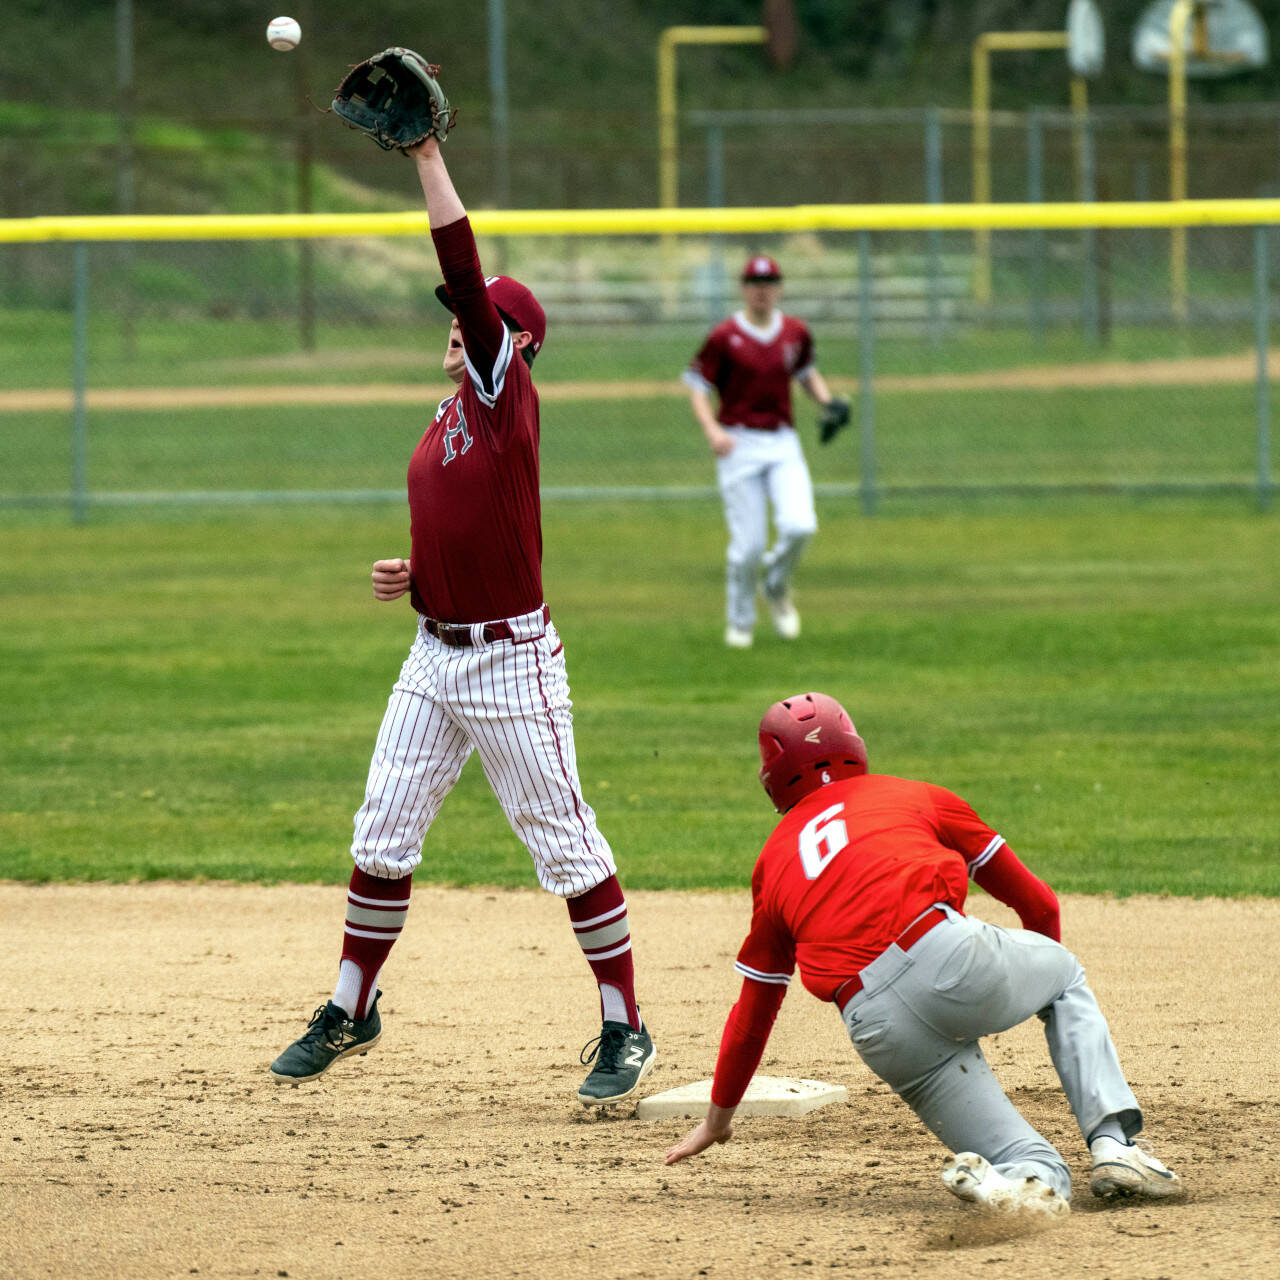 PHOTO BY FOREST WORGUM Hoquiam’s Joey Bozich reaches up to make a catch during a 4-3 win over Castle Rock on Wednesday at Olympic Stadium in Hoquiam.